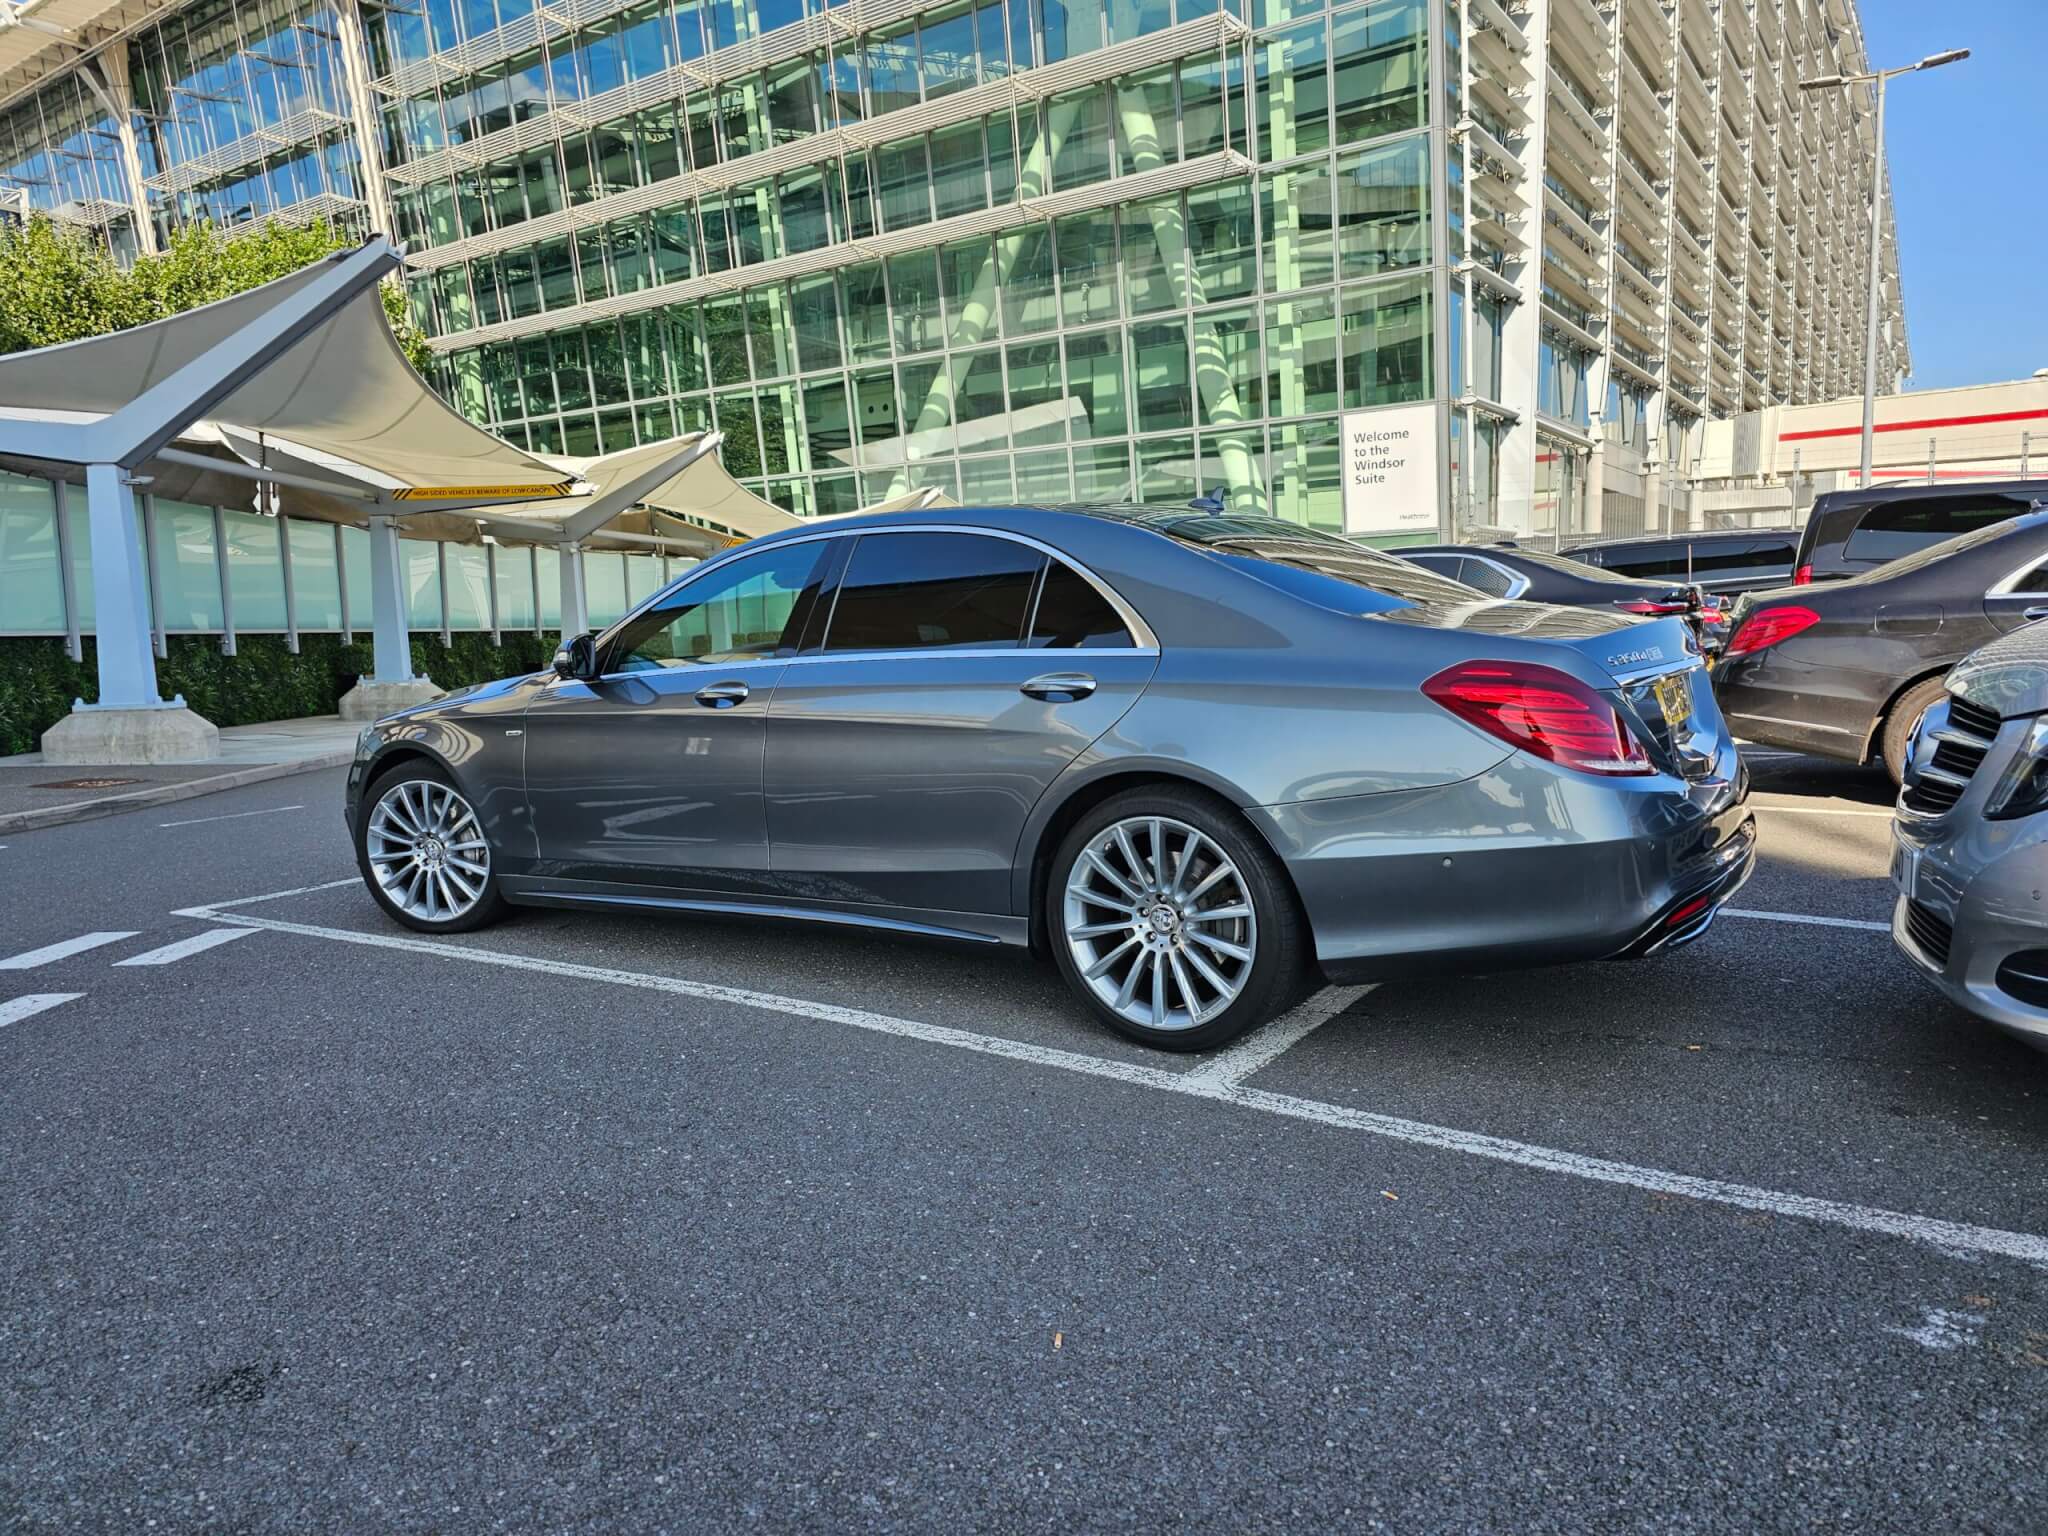 Our Mercedes s class sat waiting for customers at the Windsor Suite Heathrow Airport